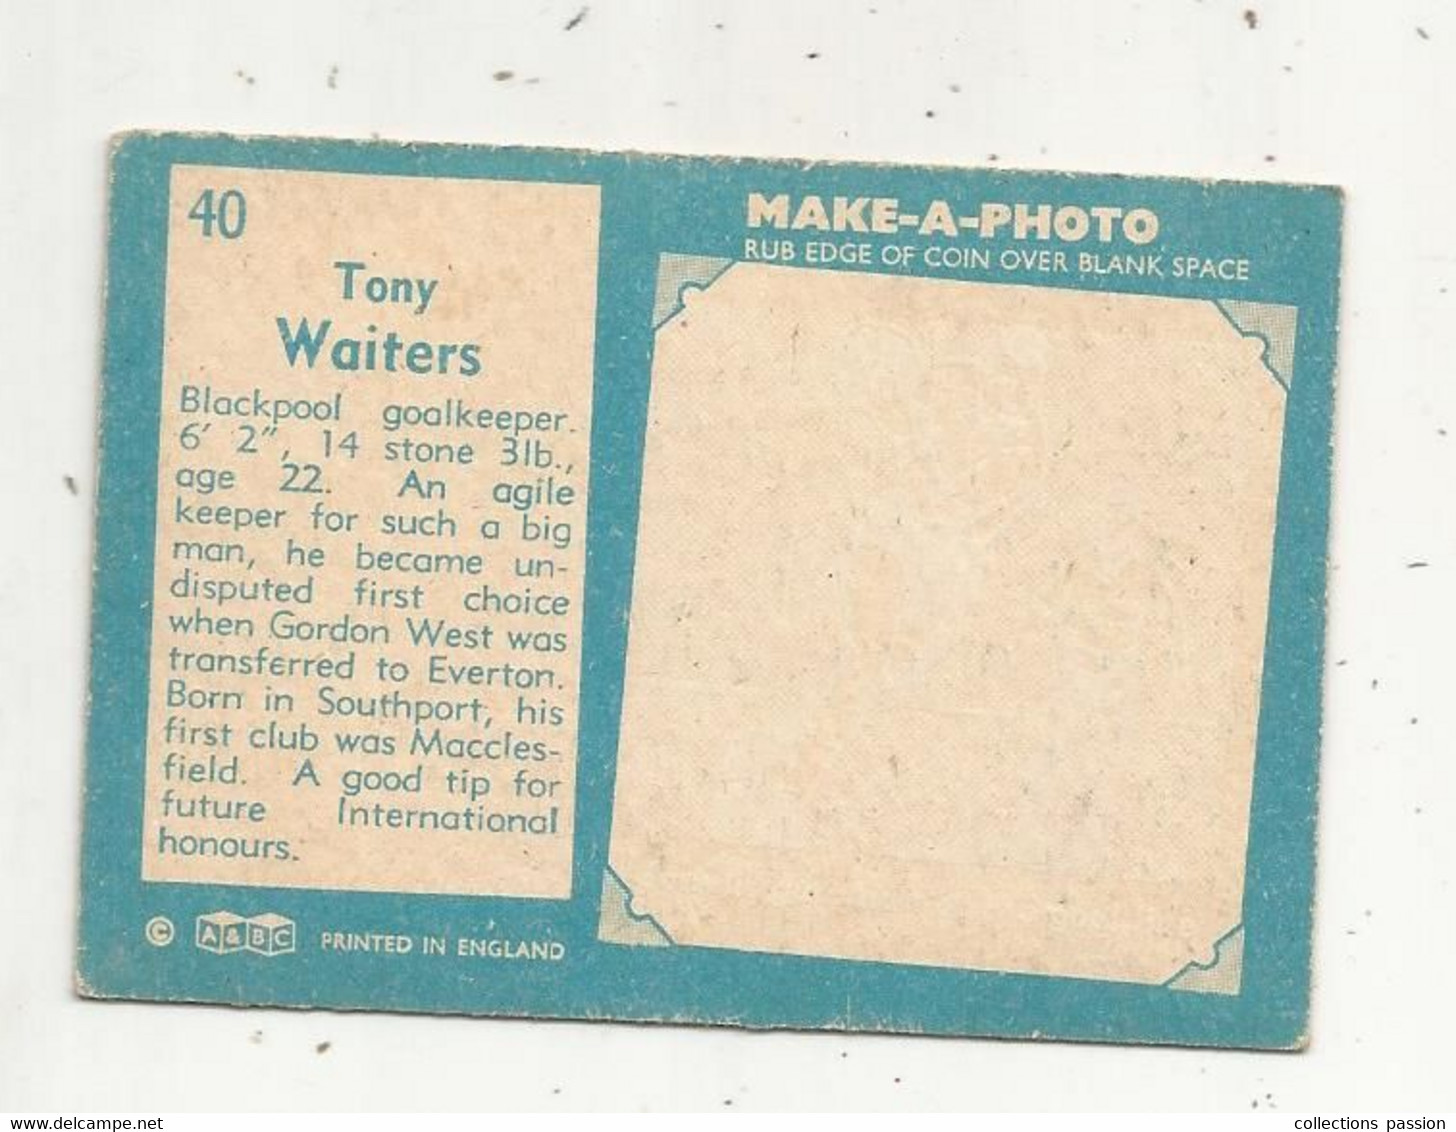 Trading Card , A&BC , England, Chewing Gum, Serie : Make A Photo , Année 60 , N° 40 , TONY WAITERS , Blackpool - Trading-Karten